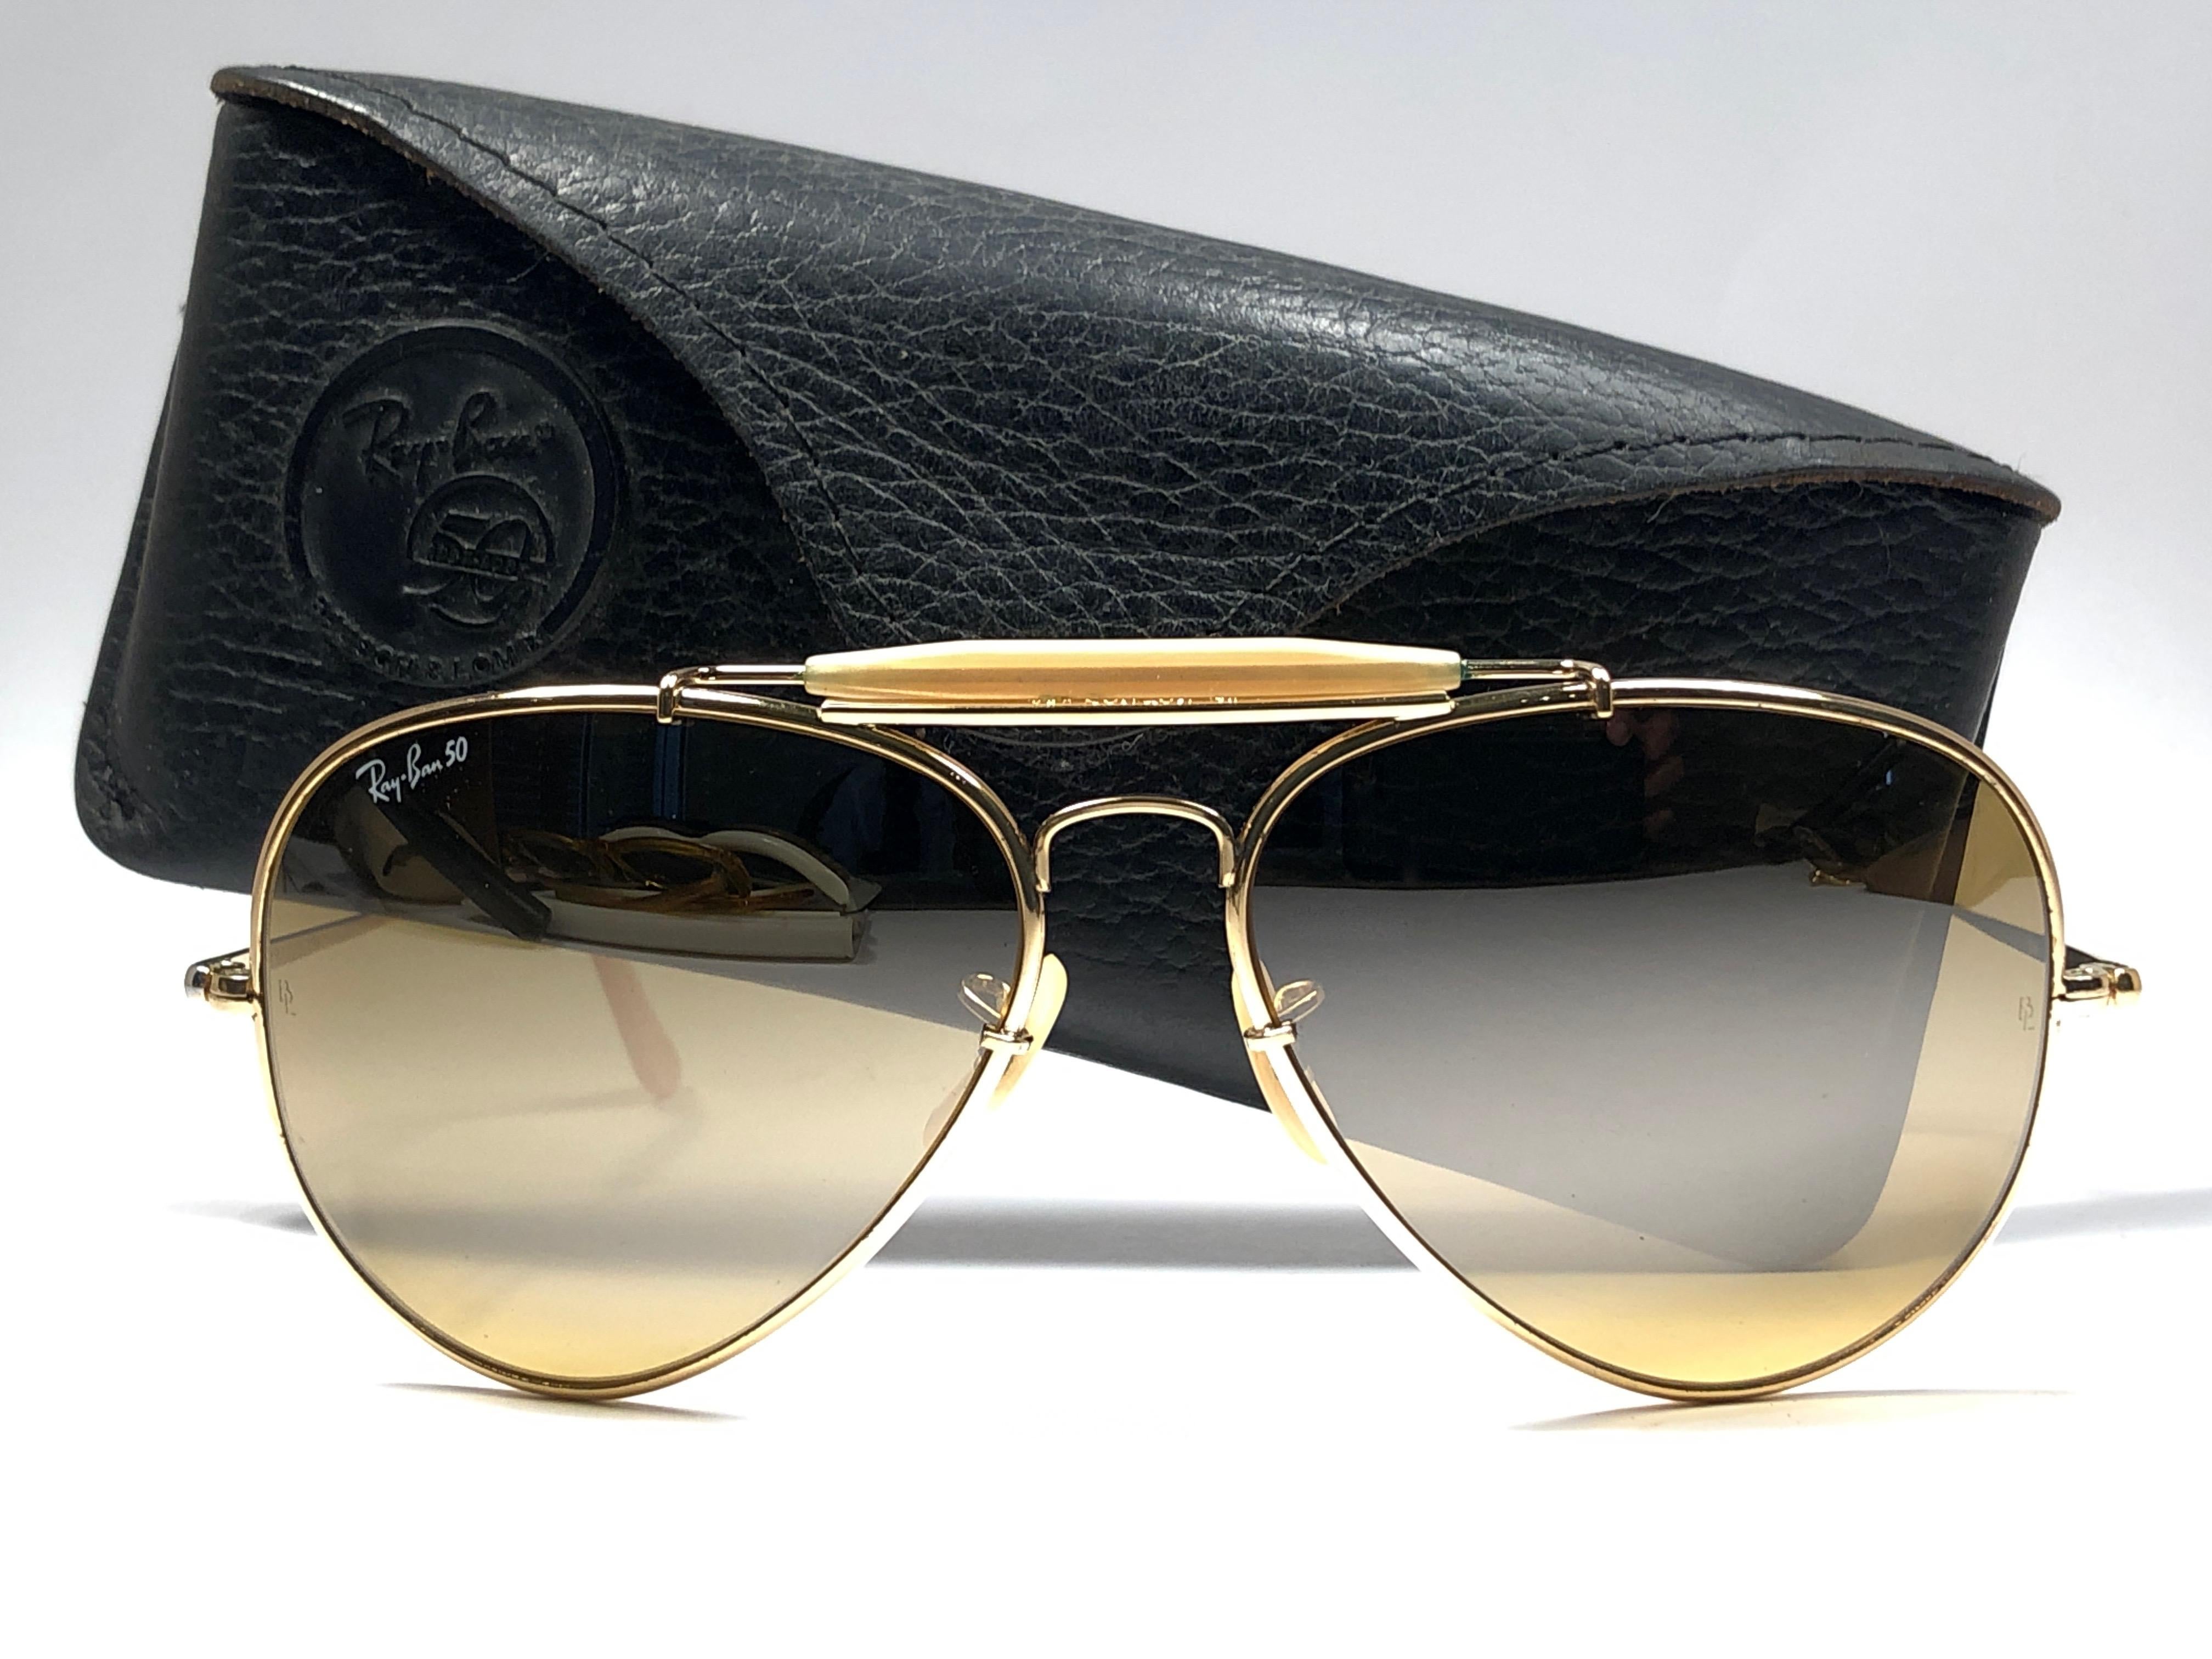 Mint 50th Anniversary Edition 1937-1987 Ray Ban The General Gold Bravura frame with the extra strong temples. 
RB 50 Ambermatic mirror lenses. Ray Ban 50 written on the right lens. B&L Ray Ban Usa. Under the bridge 62 [] 14. Comes with original